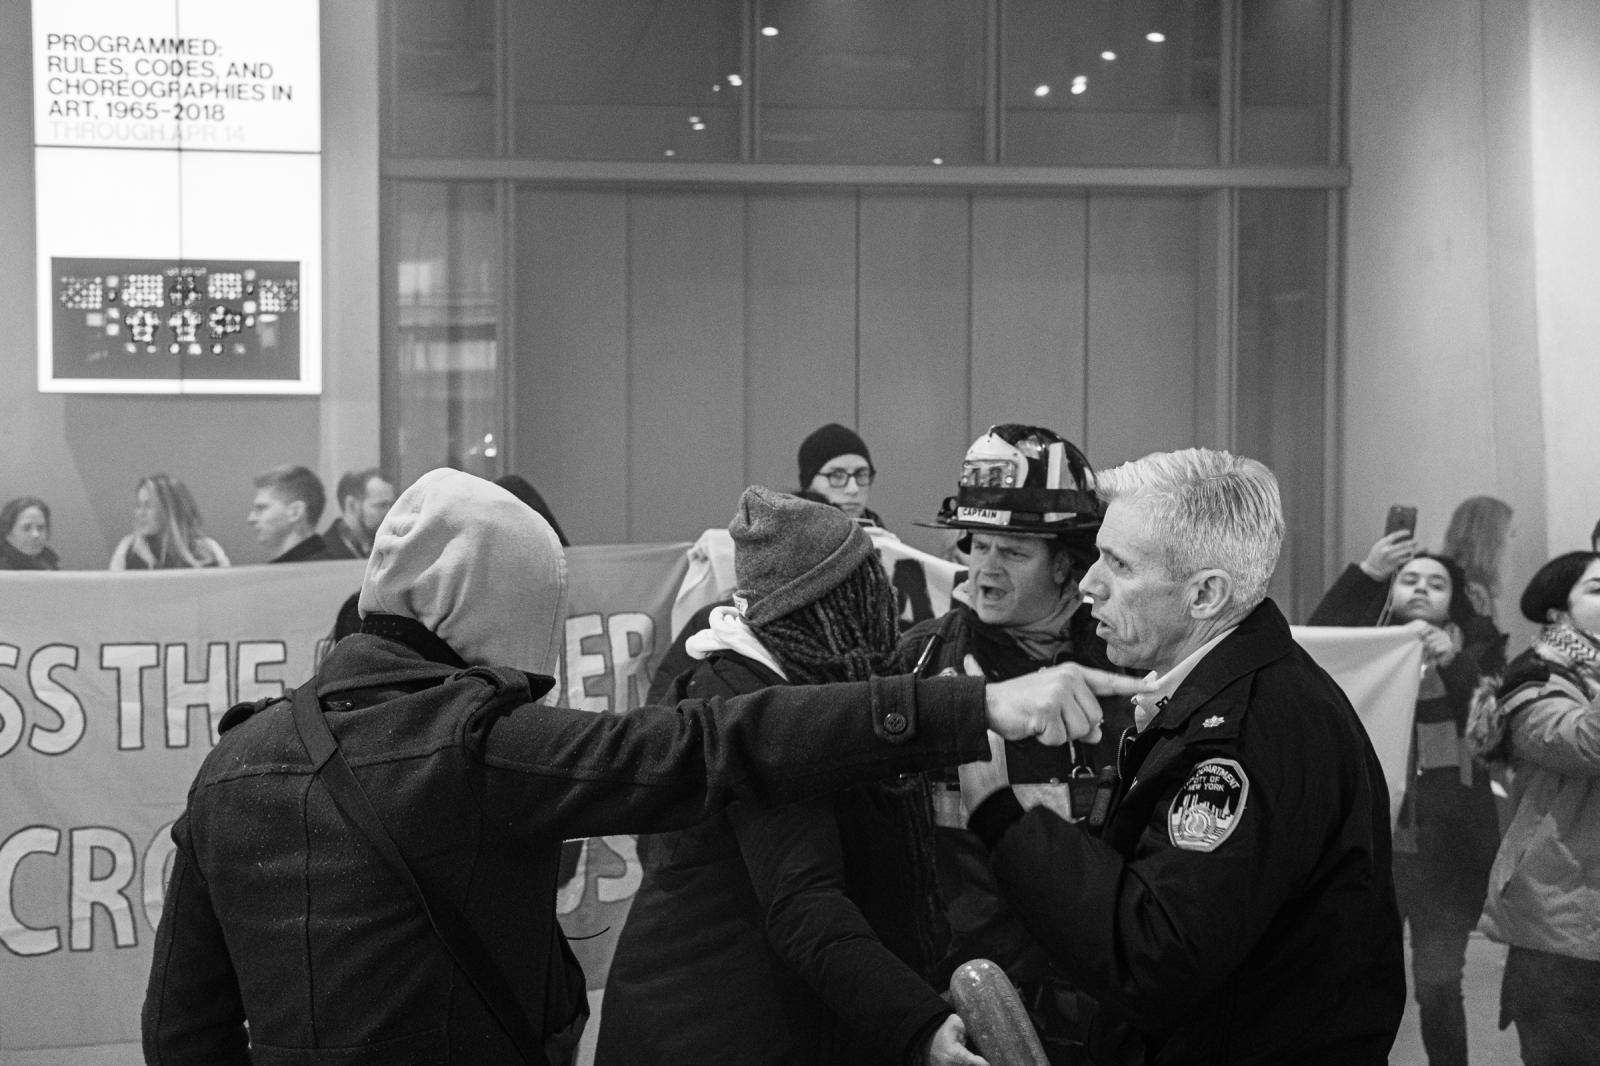 Image from  Protest Against Warren Kanders at the  Whitney Museum of American Art - The Whitney Museum of American Art, NY. 09 December 2018